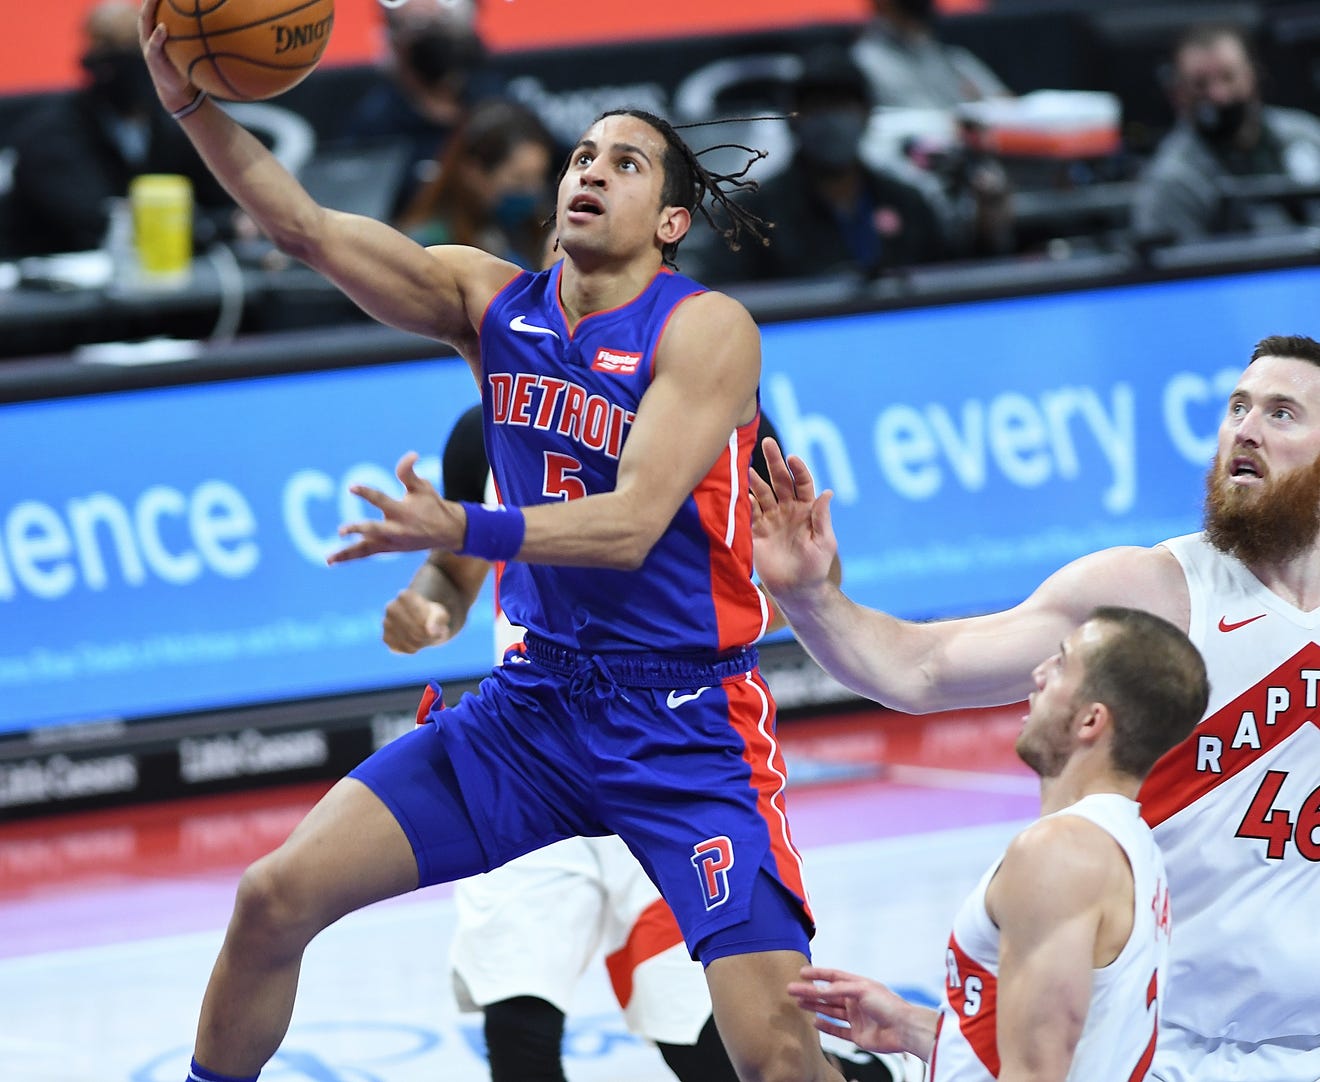 Pistons guard Frank Jackson has contributed well in his return from illness and injury.